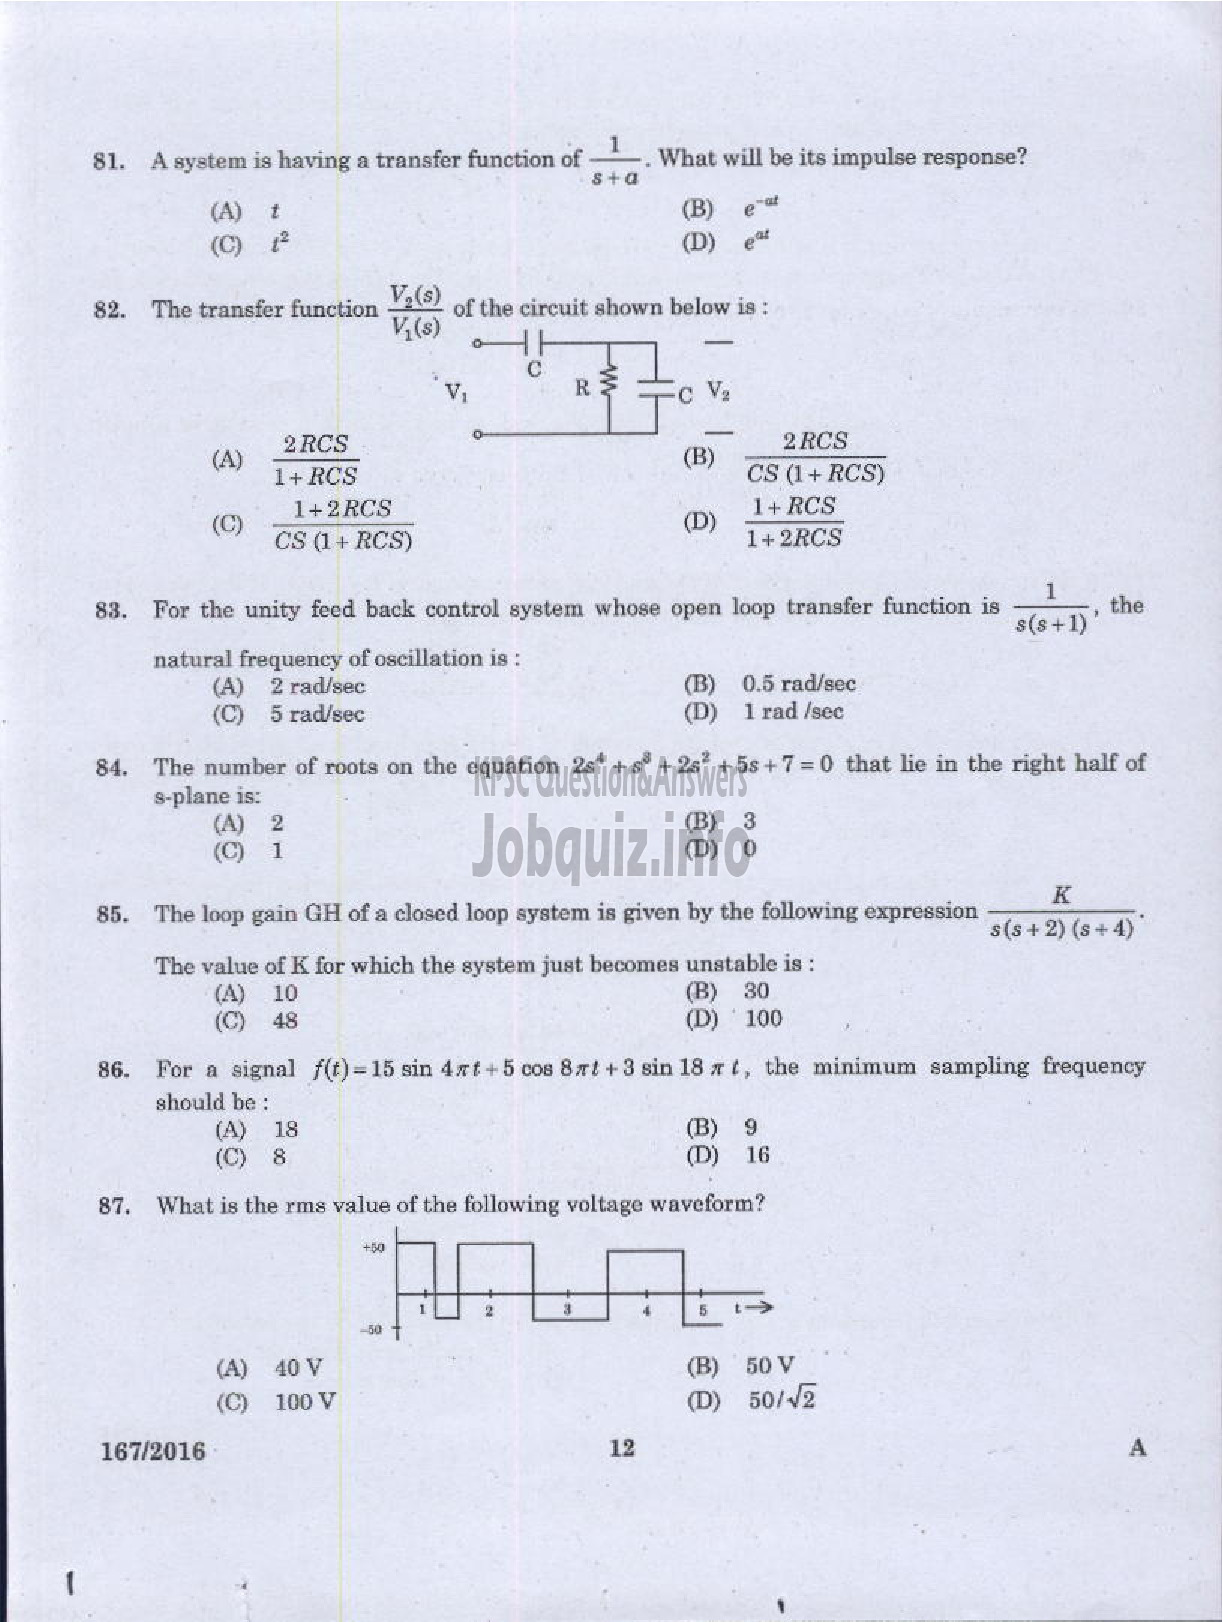 Kerala PSC Question Paper - LECTURER IN ELECTRICAL AND ELECTRONICS ENGINEERING GOVST POLYTECHNICS TECHNICAL EDUCATION-10